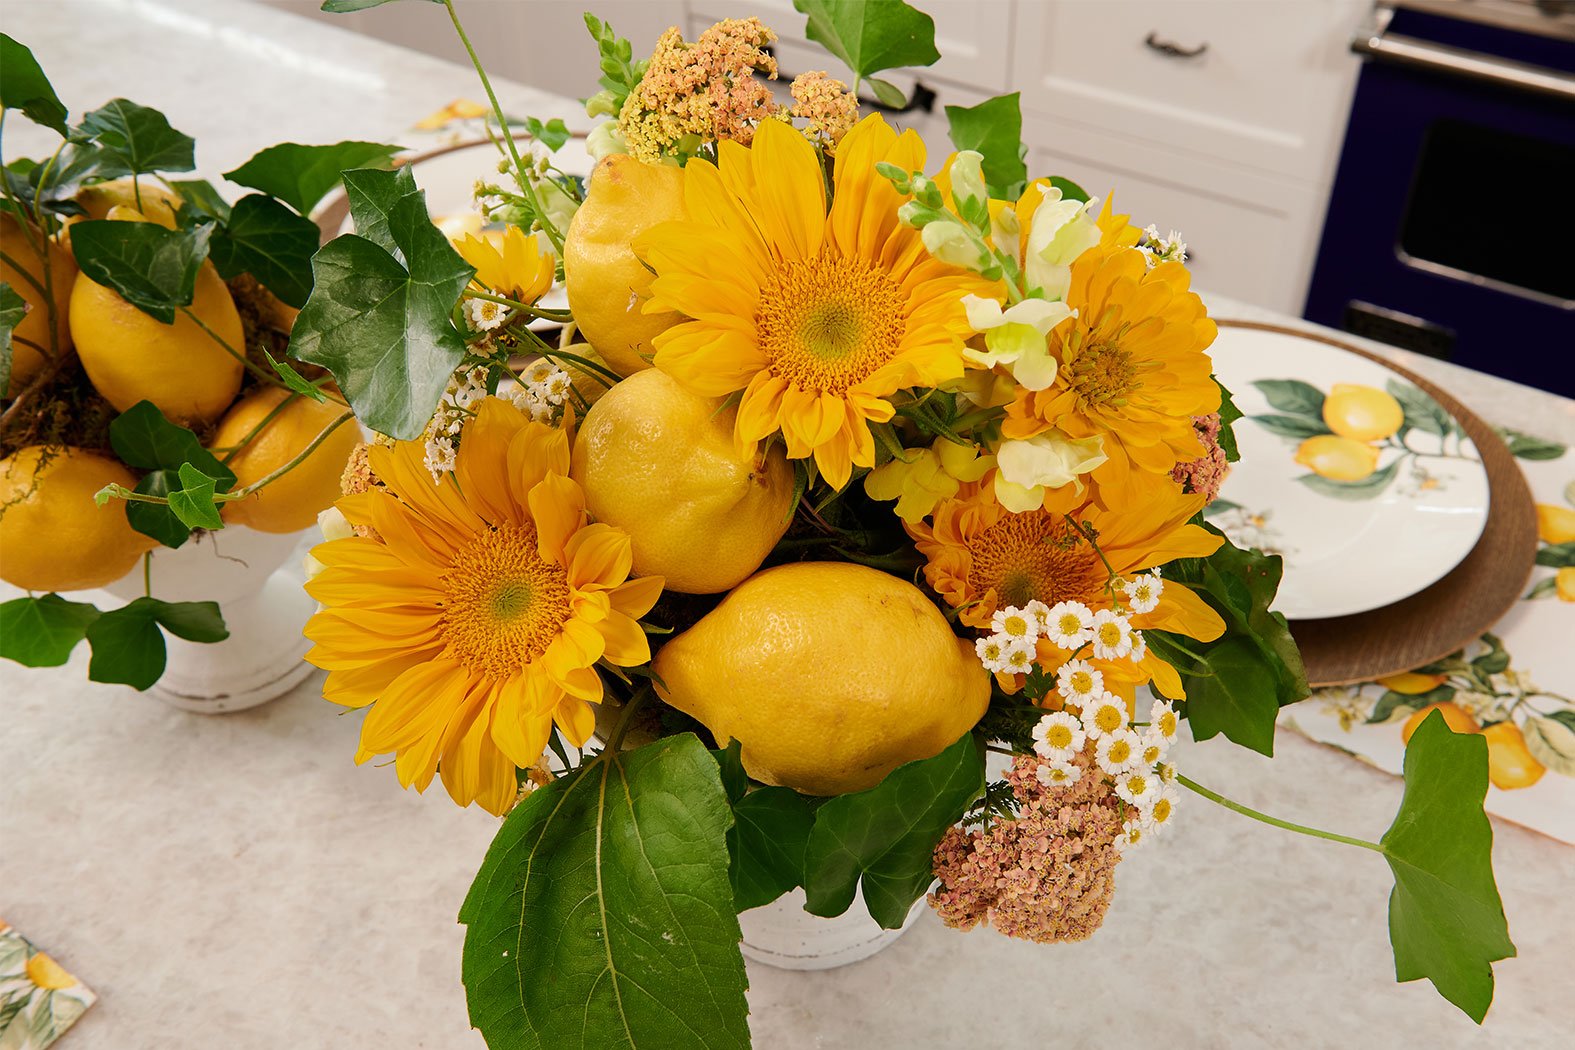 Flower Arrangements inspired by Italy- feature Sunflowers, Fresh Lemons, Chamomile, and Cottage yarrow- to complete this inspired table setting on “J Schwanke’s Life in Bloom”. 